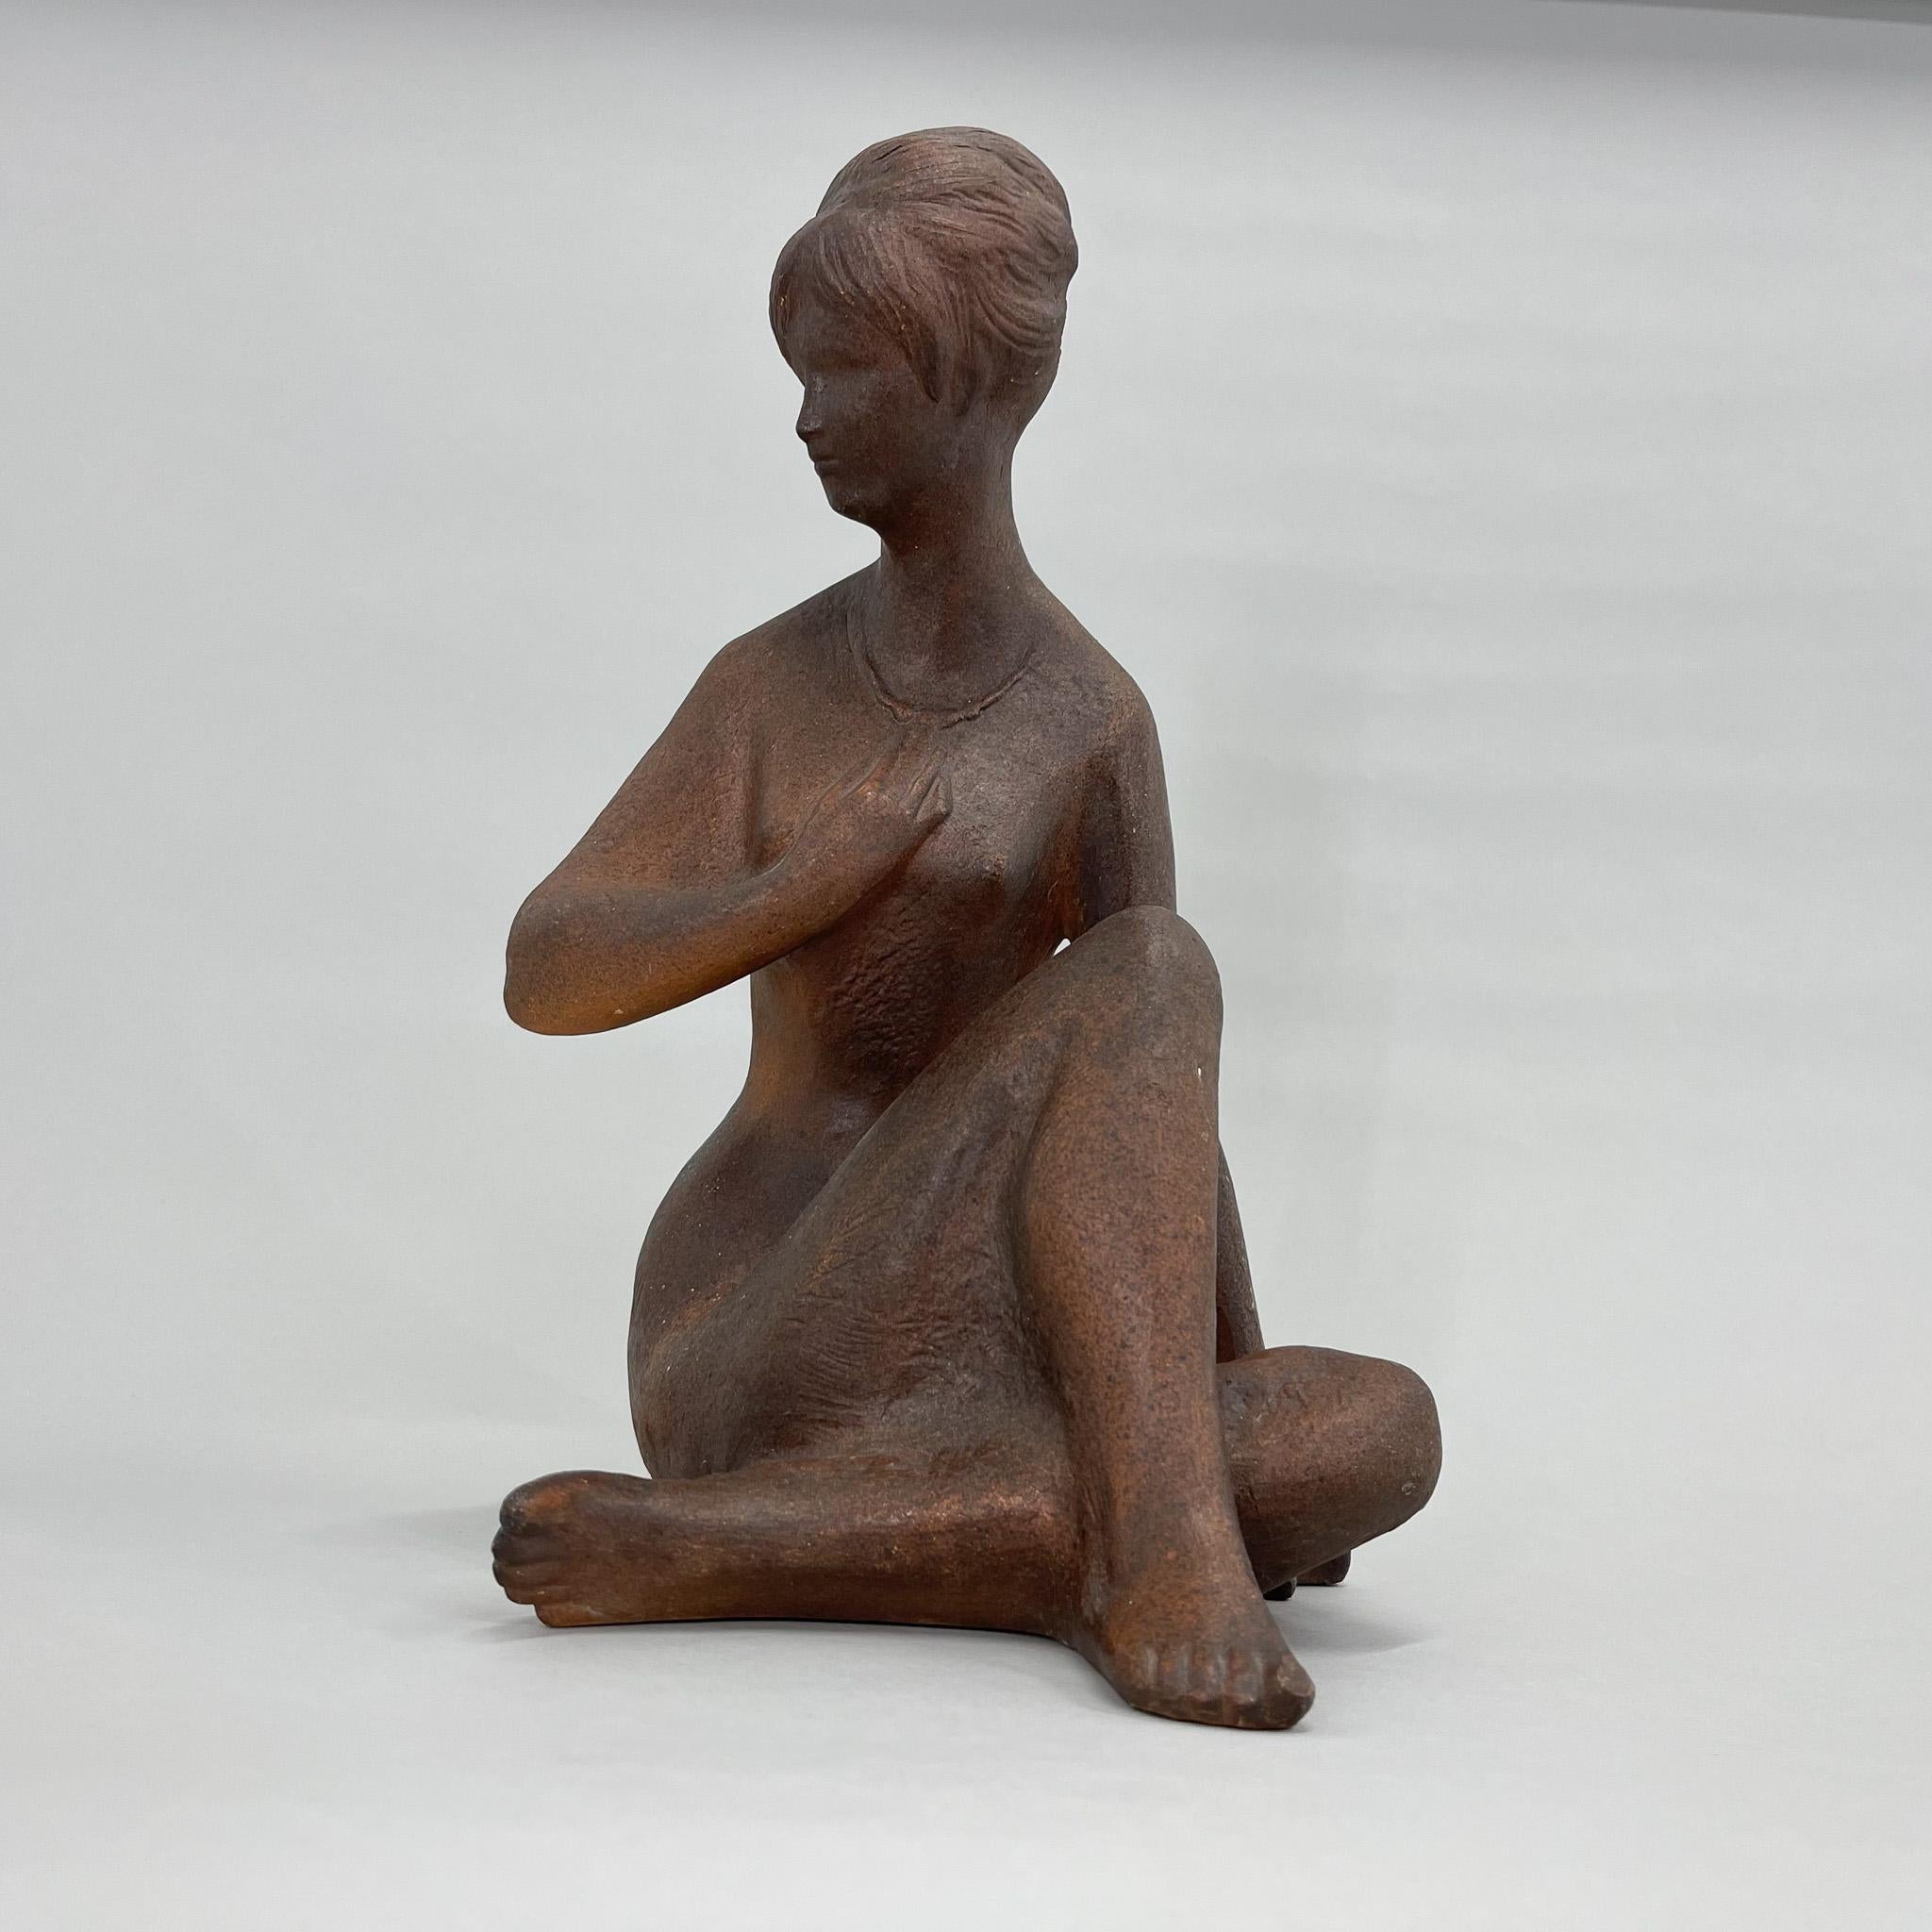 Beautiful patinated ceramic statue by Bohumil Kokrda in 1967 in Czechoslovakia. The statue of a sitting girl is signed by the author. The sculpture is in good vintage condition.